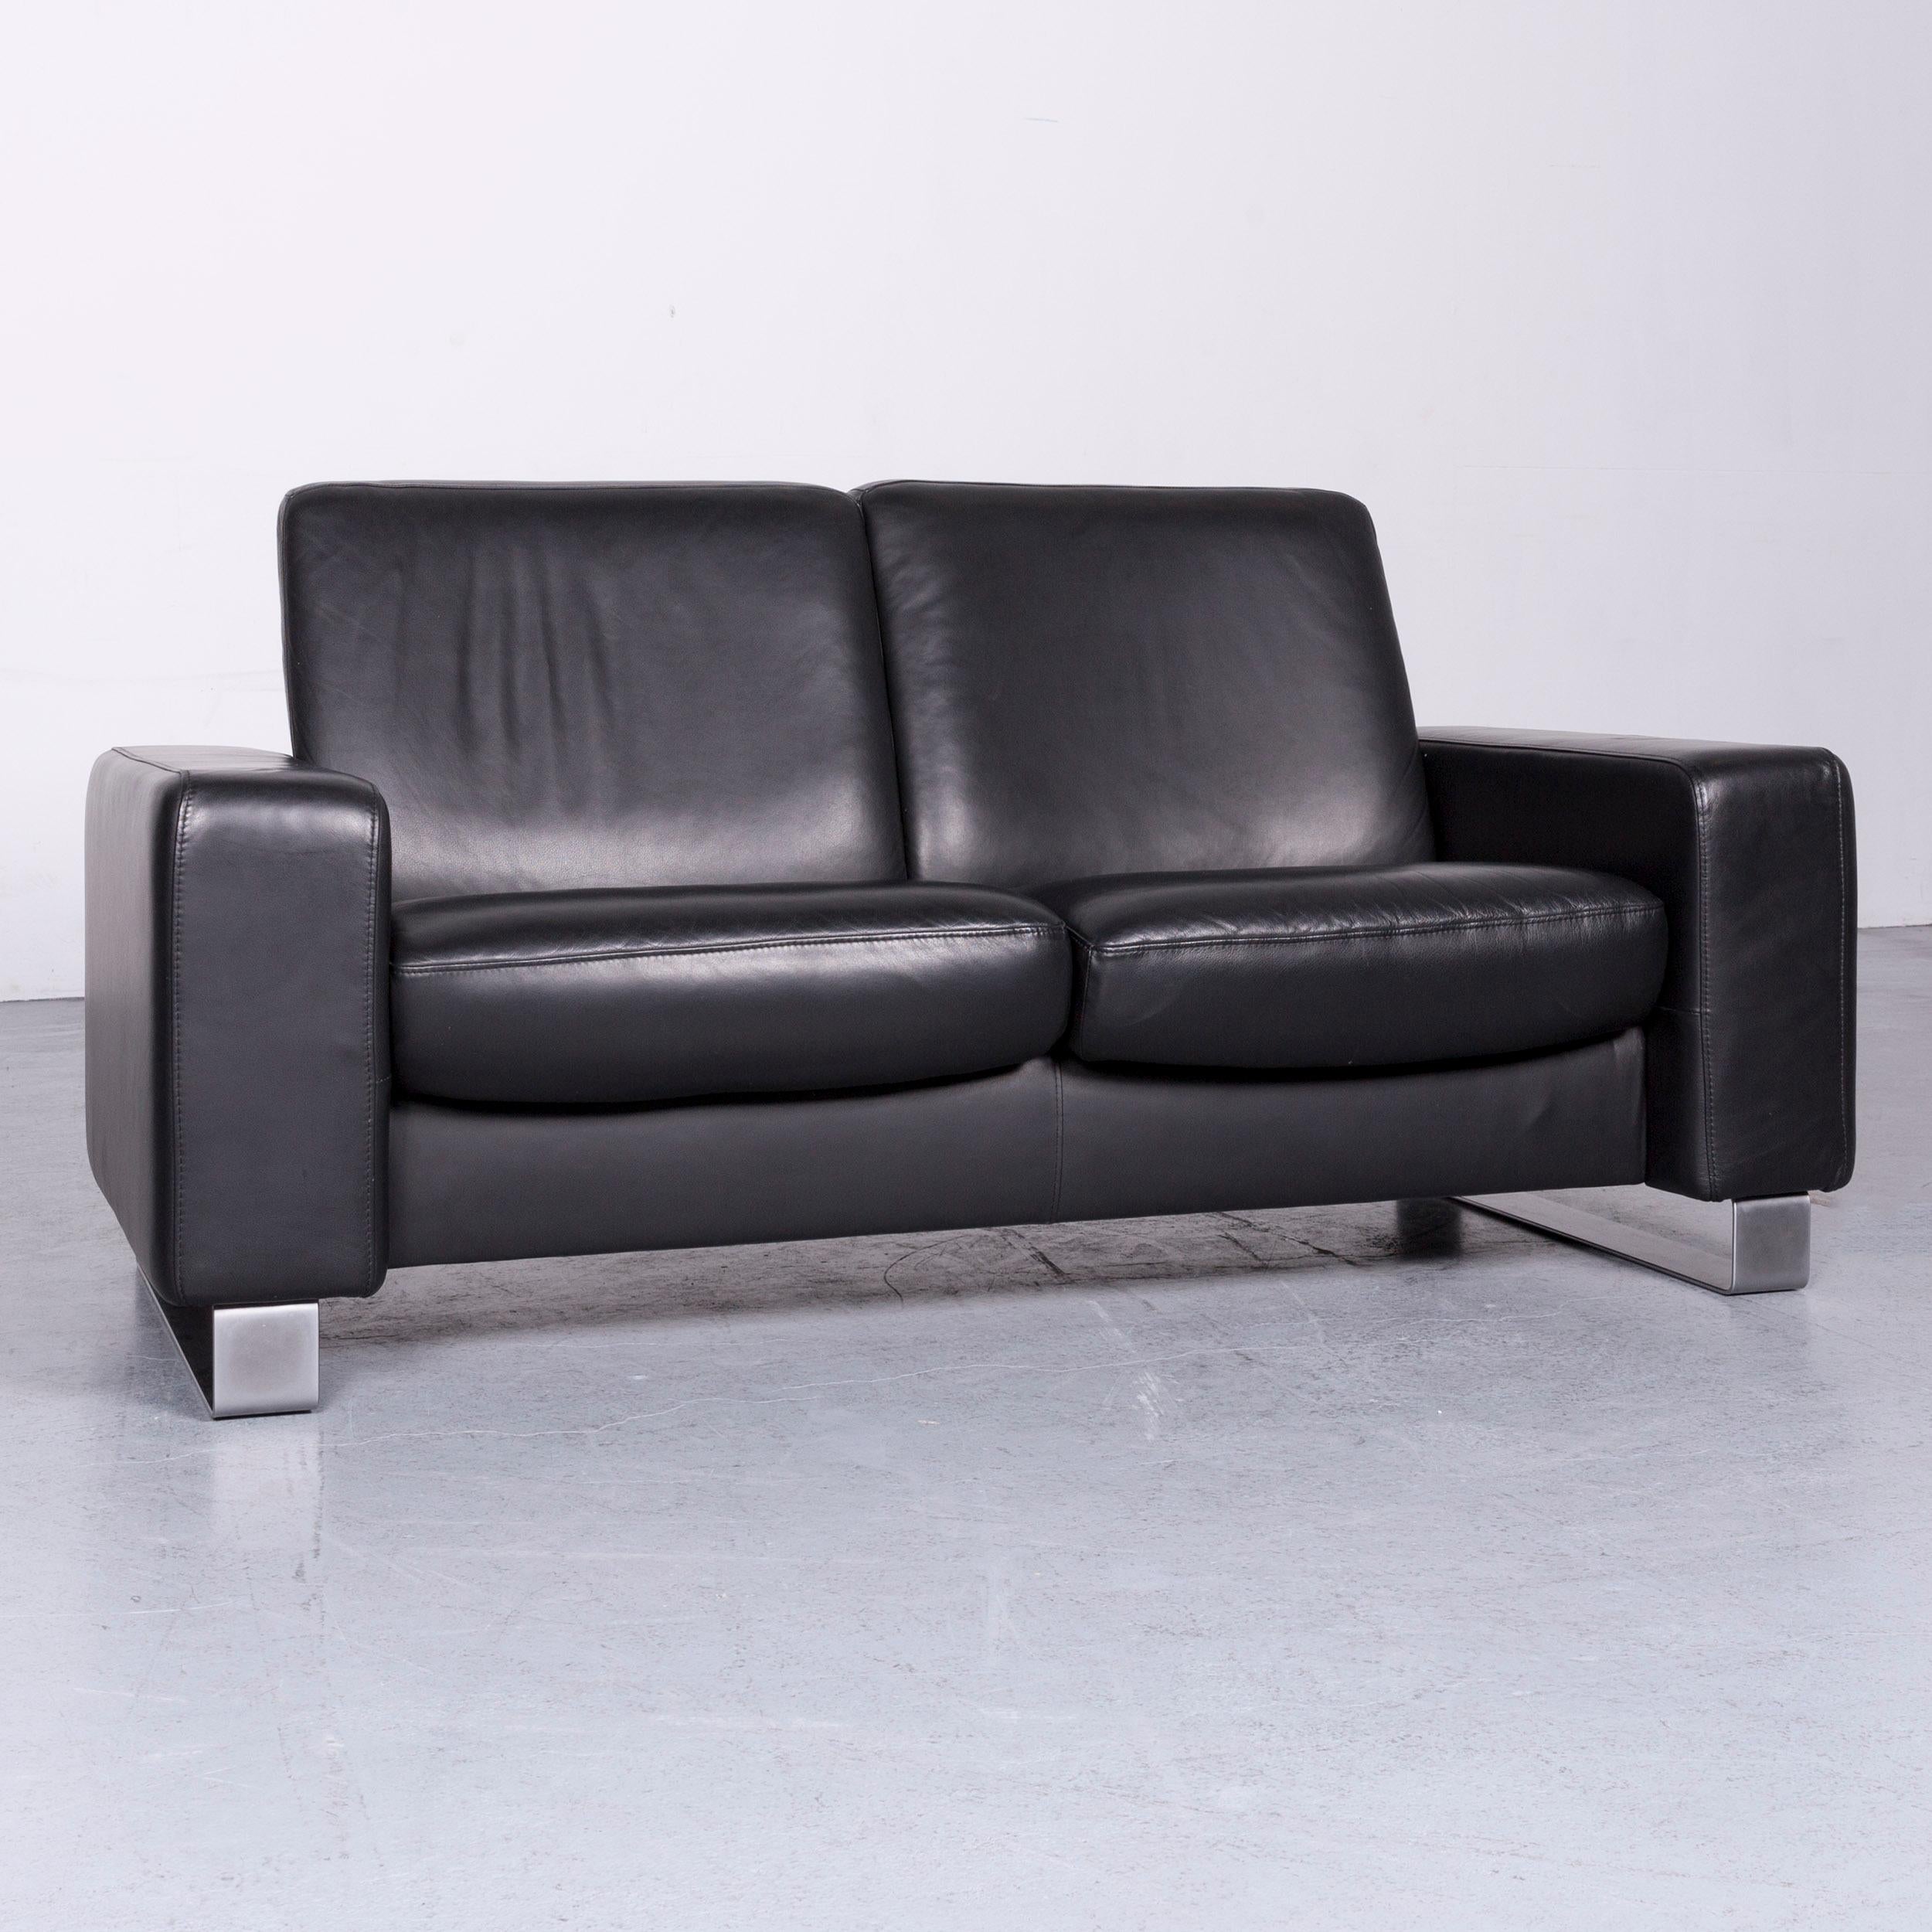 We bring to you an Ekornes Stressless space leather sofa black recliner.

















